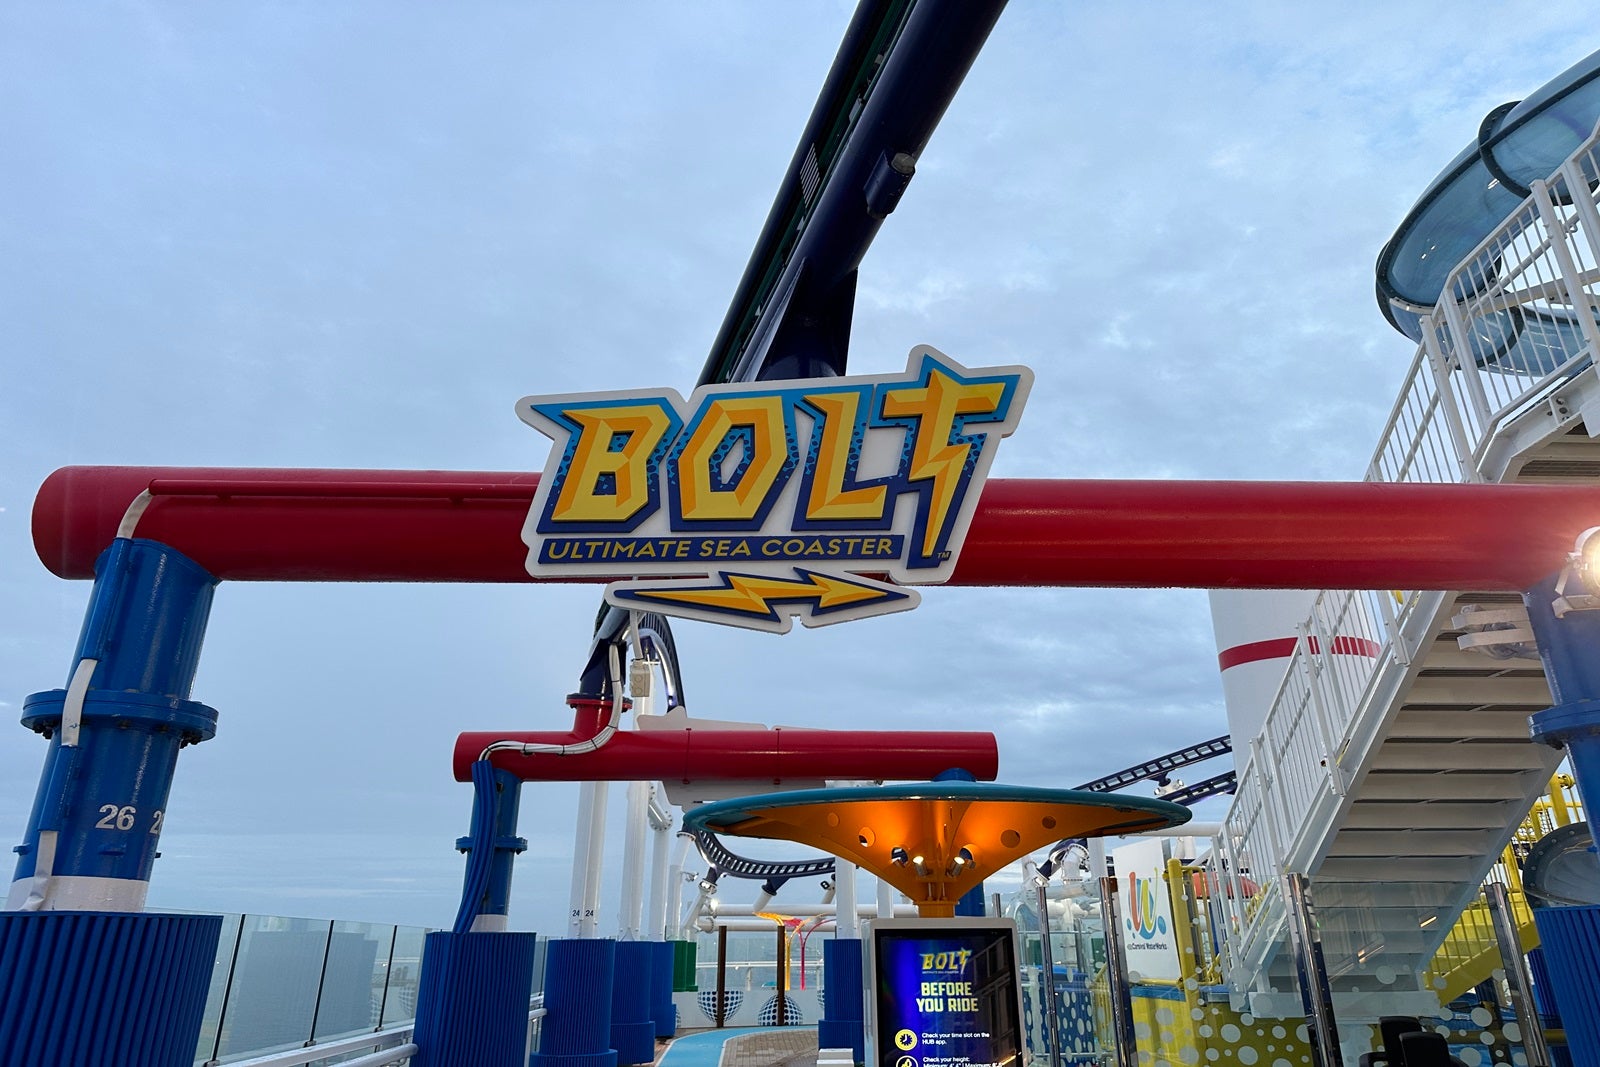 A yellow and blue sign reading "Bolt" mounted on a red pole